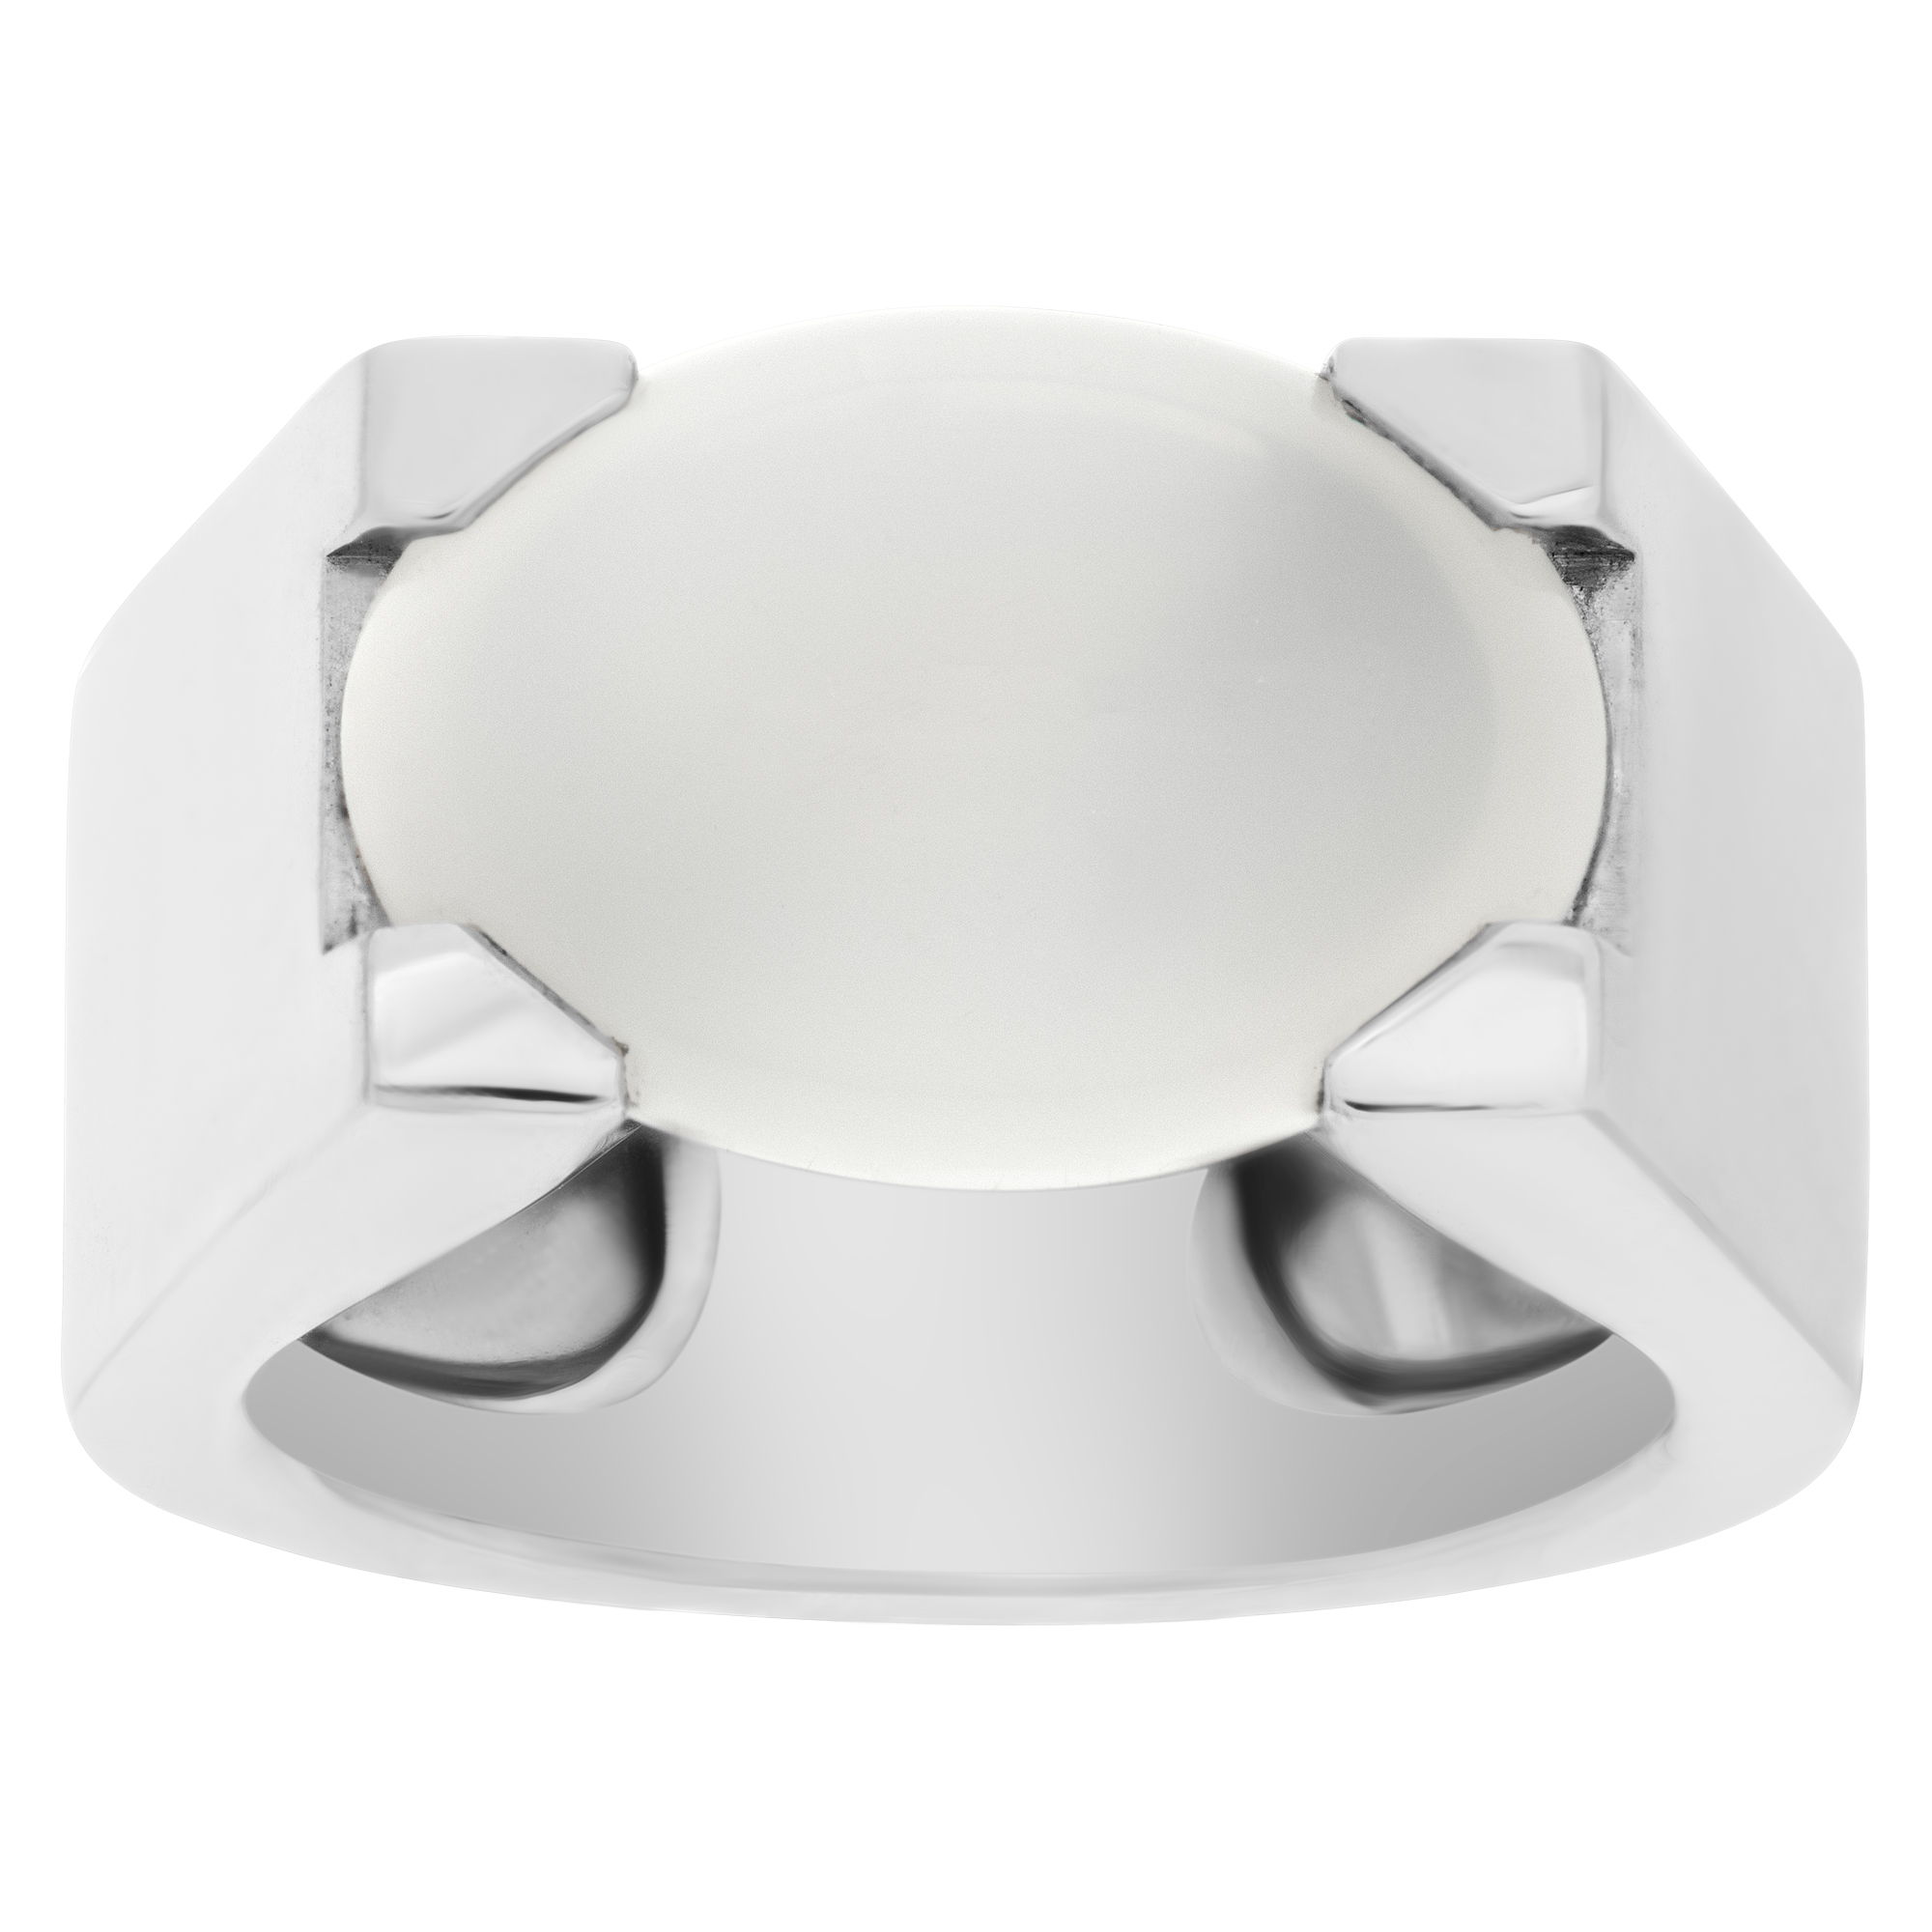 Cartier cabochon moonstone ring in 18k white gold. image 1